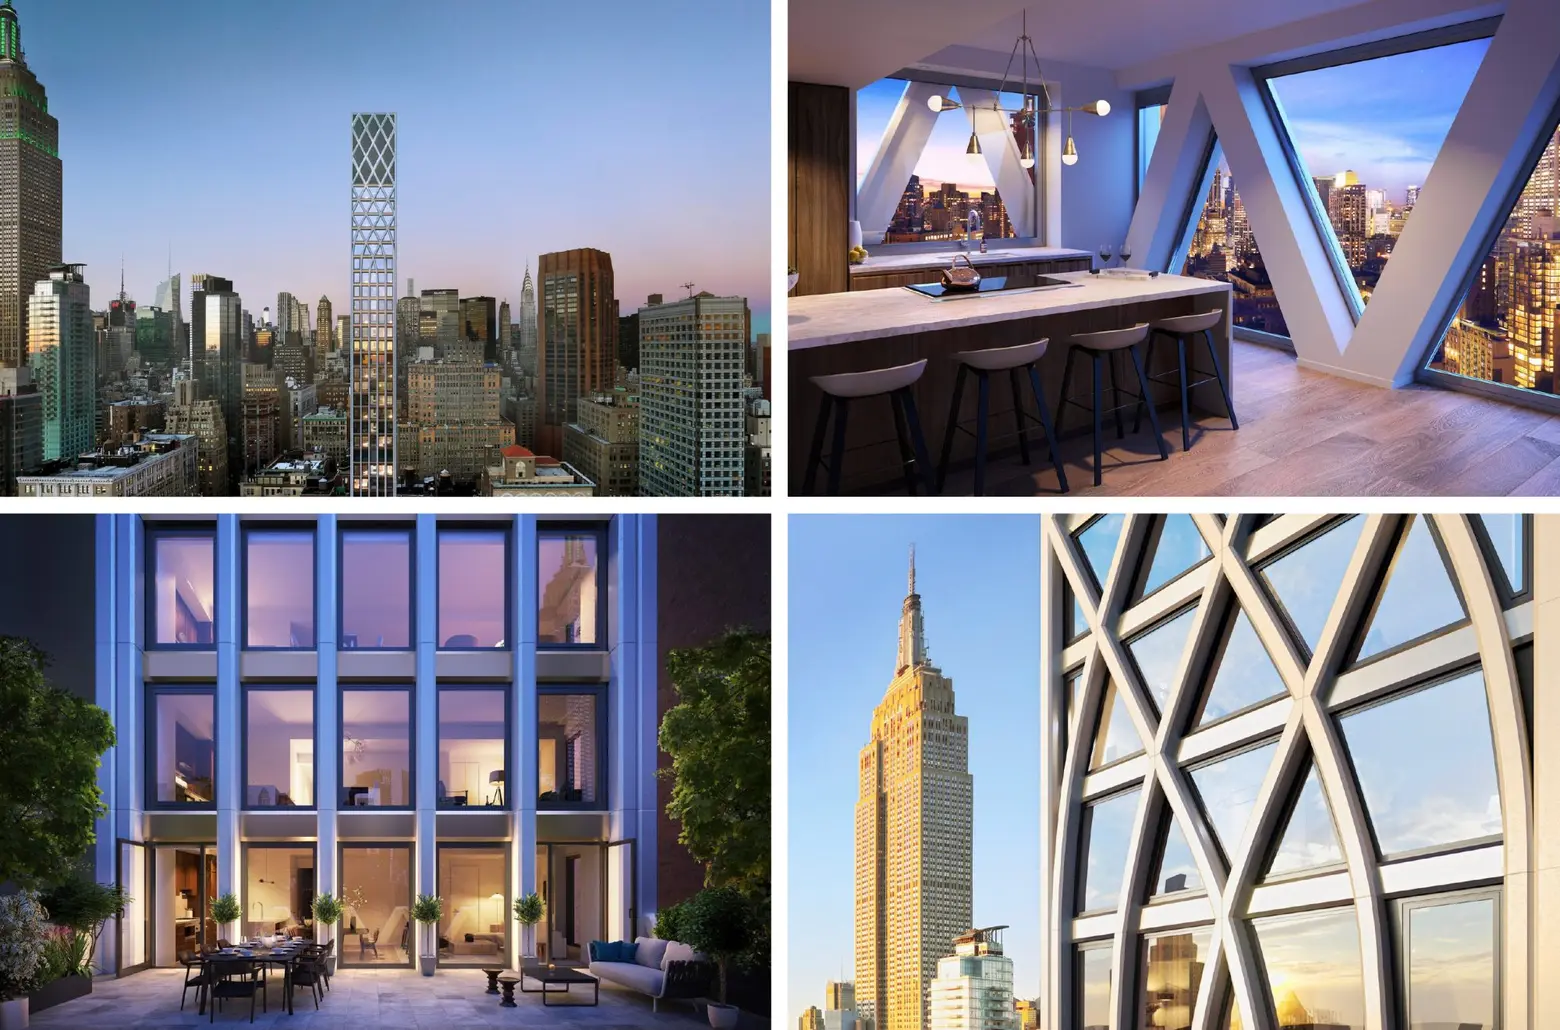 INTERVIEW: Architect Morris Adjmi on how Nomad’s 30 East 31st Street helps define a changing city